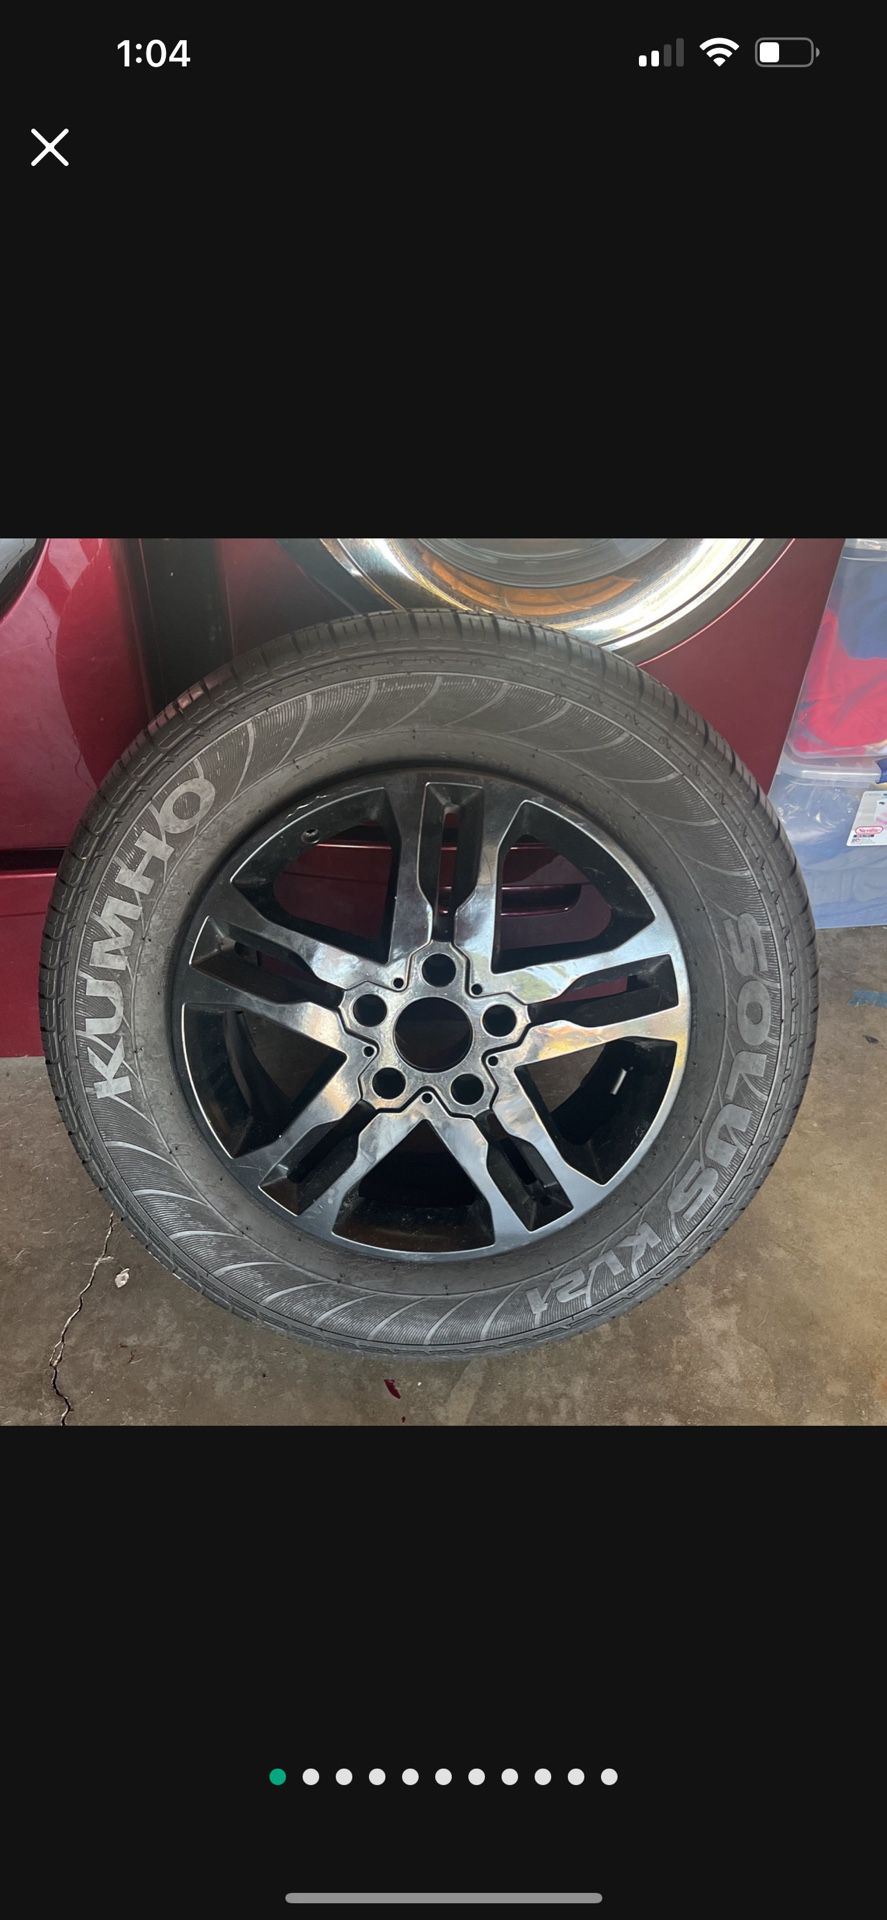 PICKUP TODAY!!!$1,700 OBO- Mercedes G550 G Wagon Rims x4 w/ new tires